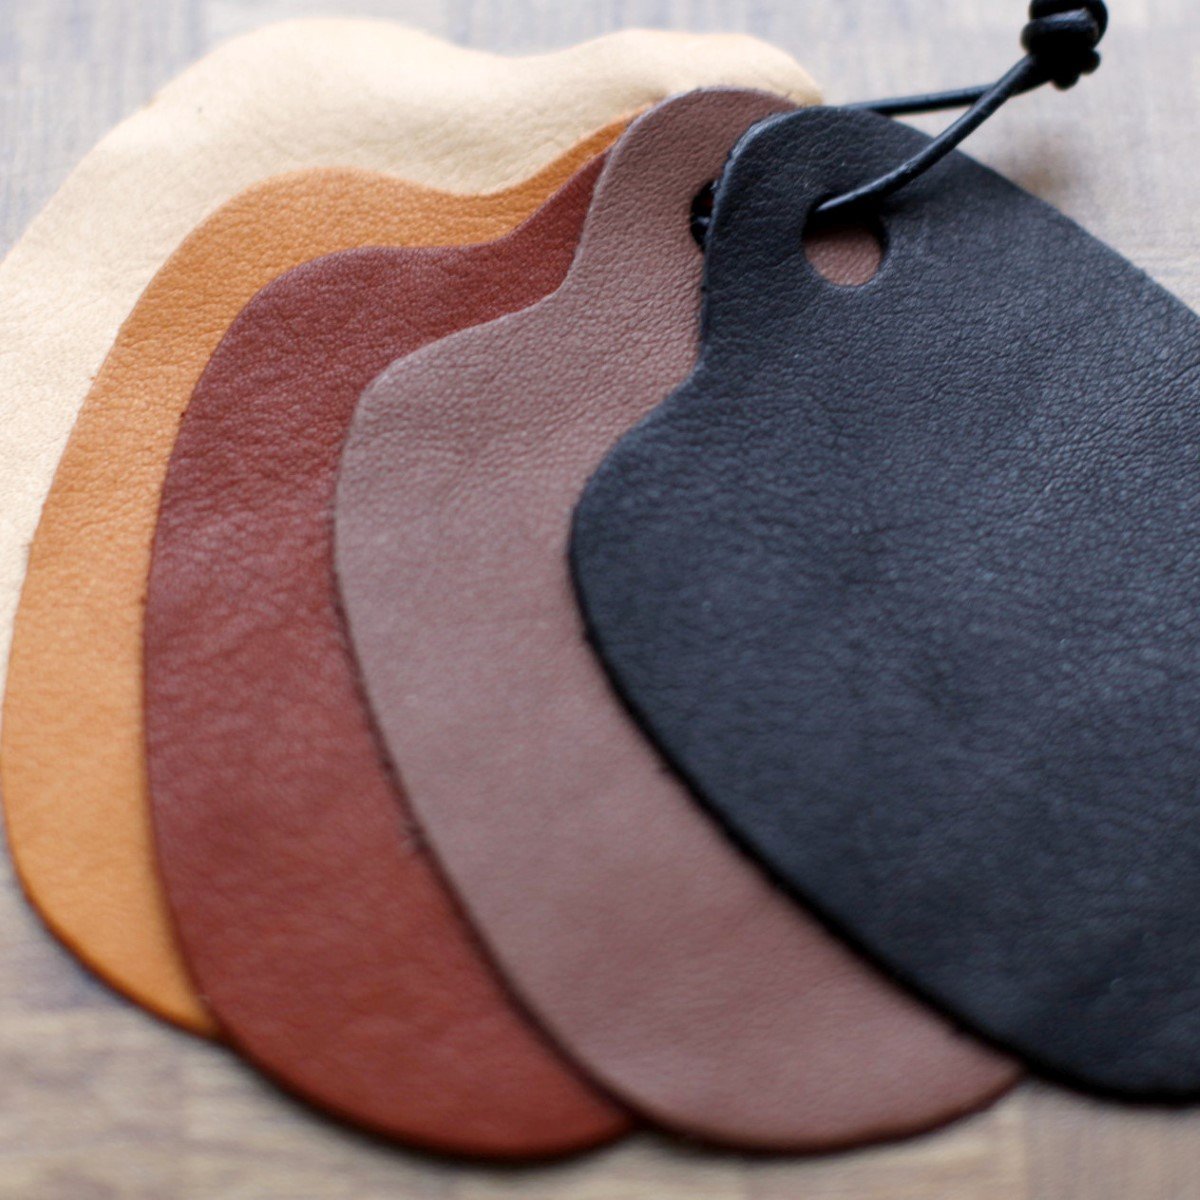 TÄRNSJÖ | Tärnsjö Garveri from Sweden, a manufacturer that supplies a very specialized market that requires only premium tanned leathers. Skin thickness about 1mm.